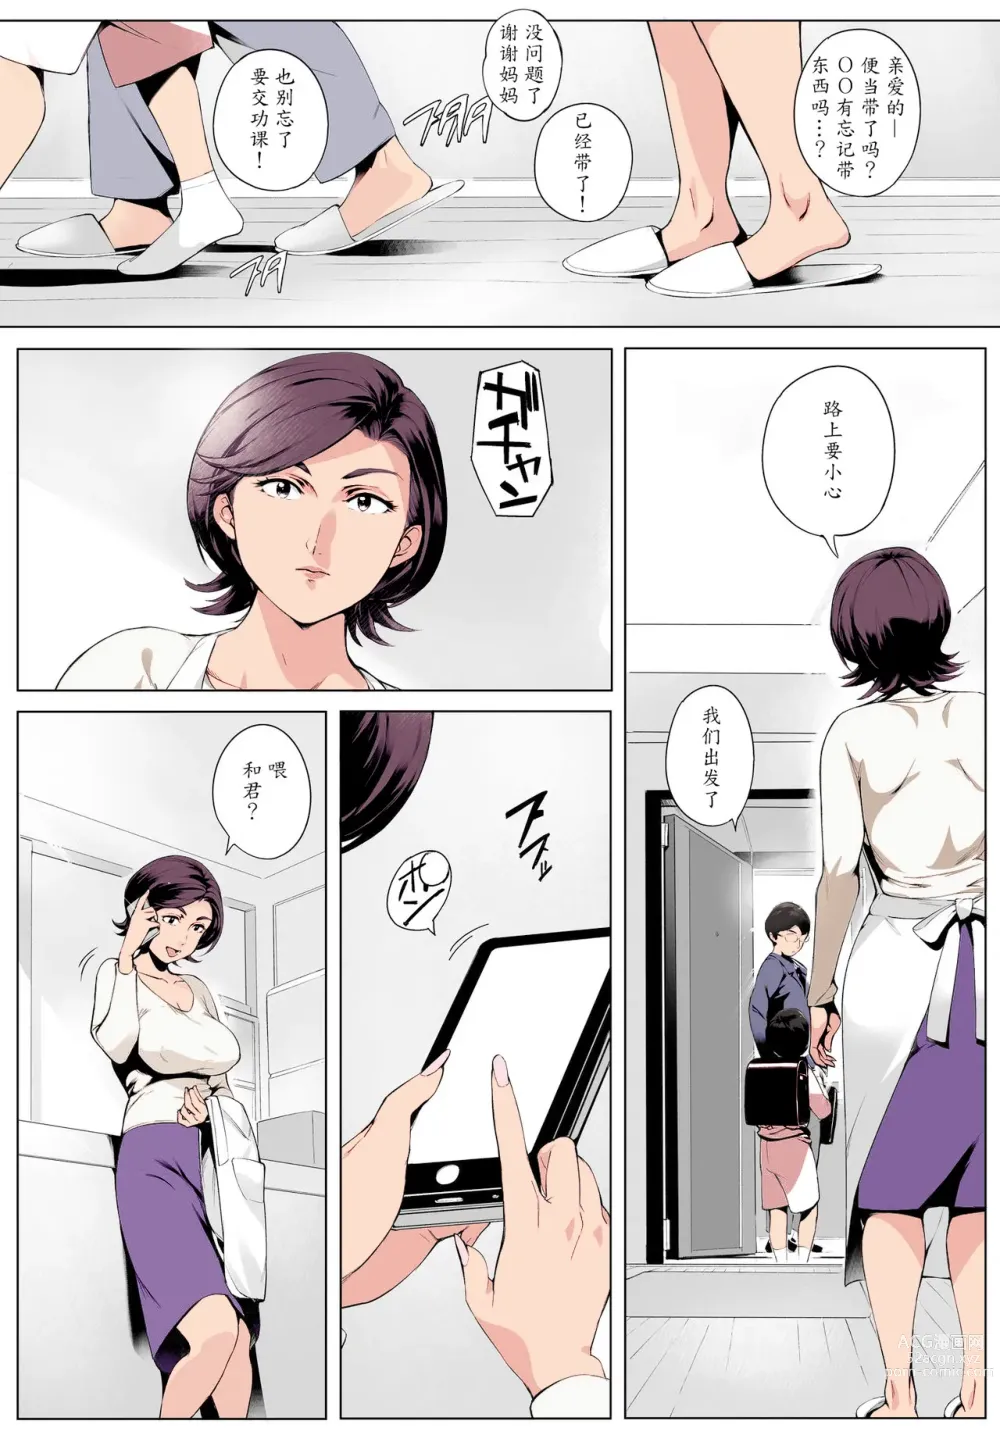 Page 4 of doujinshi Cheating Wife Honoka ~Caught Red-Handed Edition~